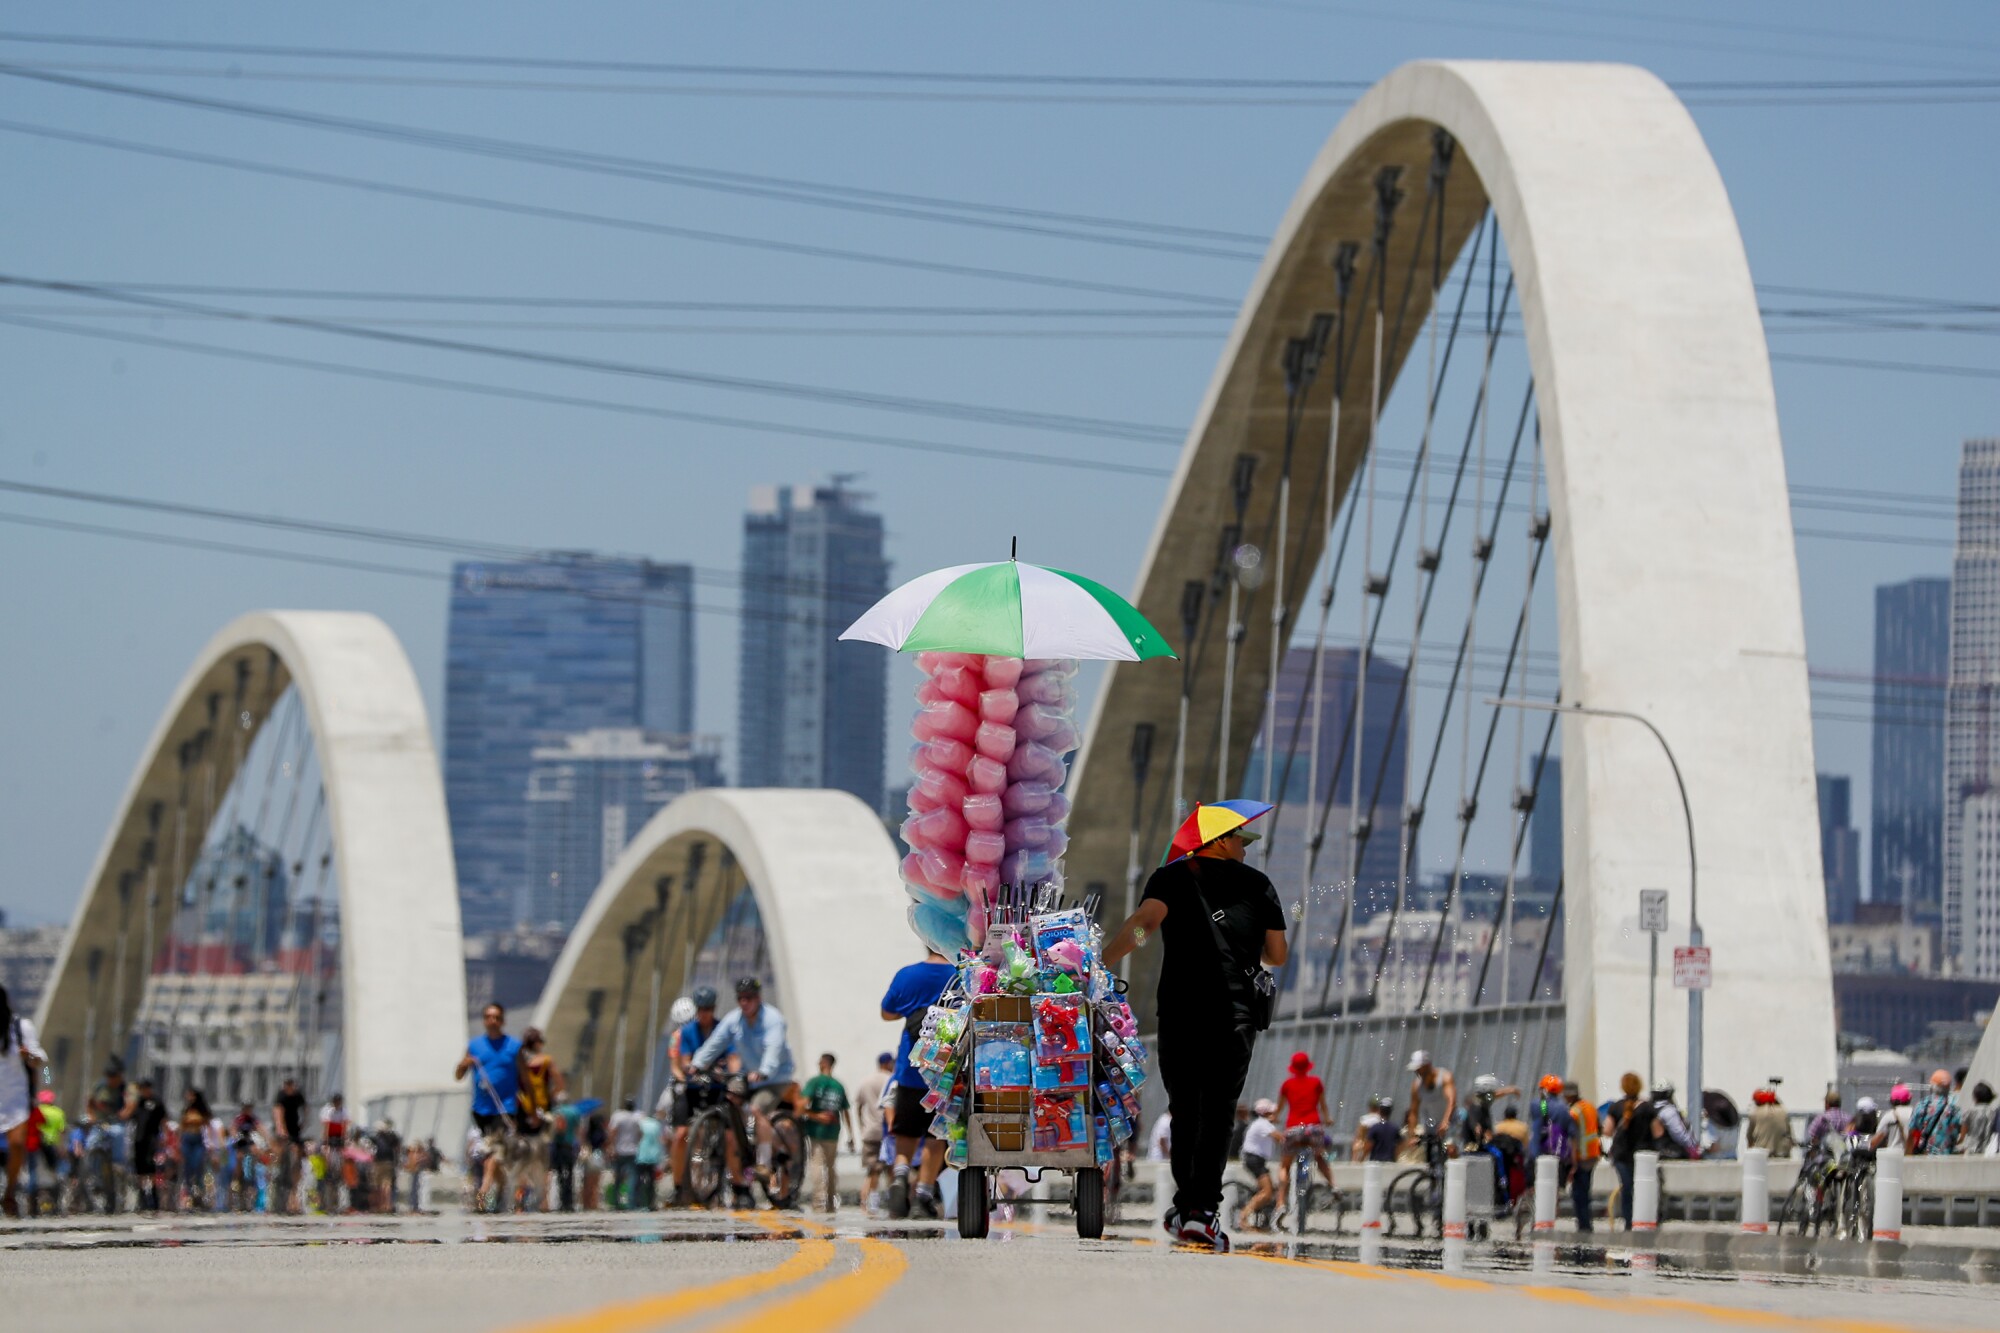 A vendor makes his way across the 6th Street Viaduct.